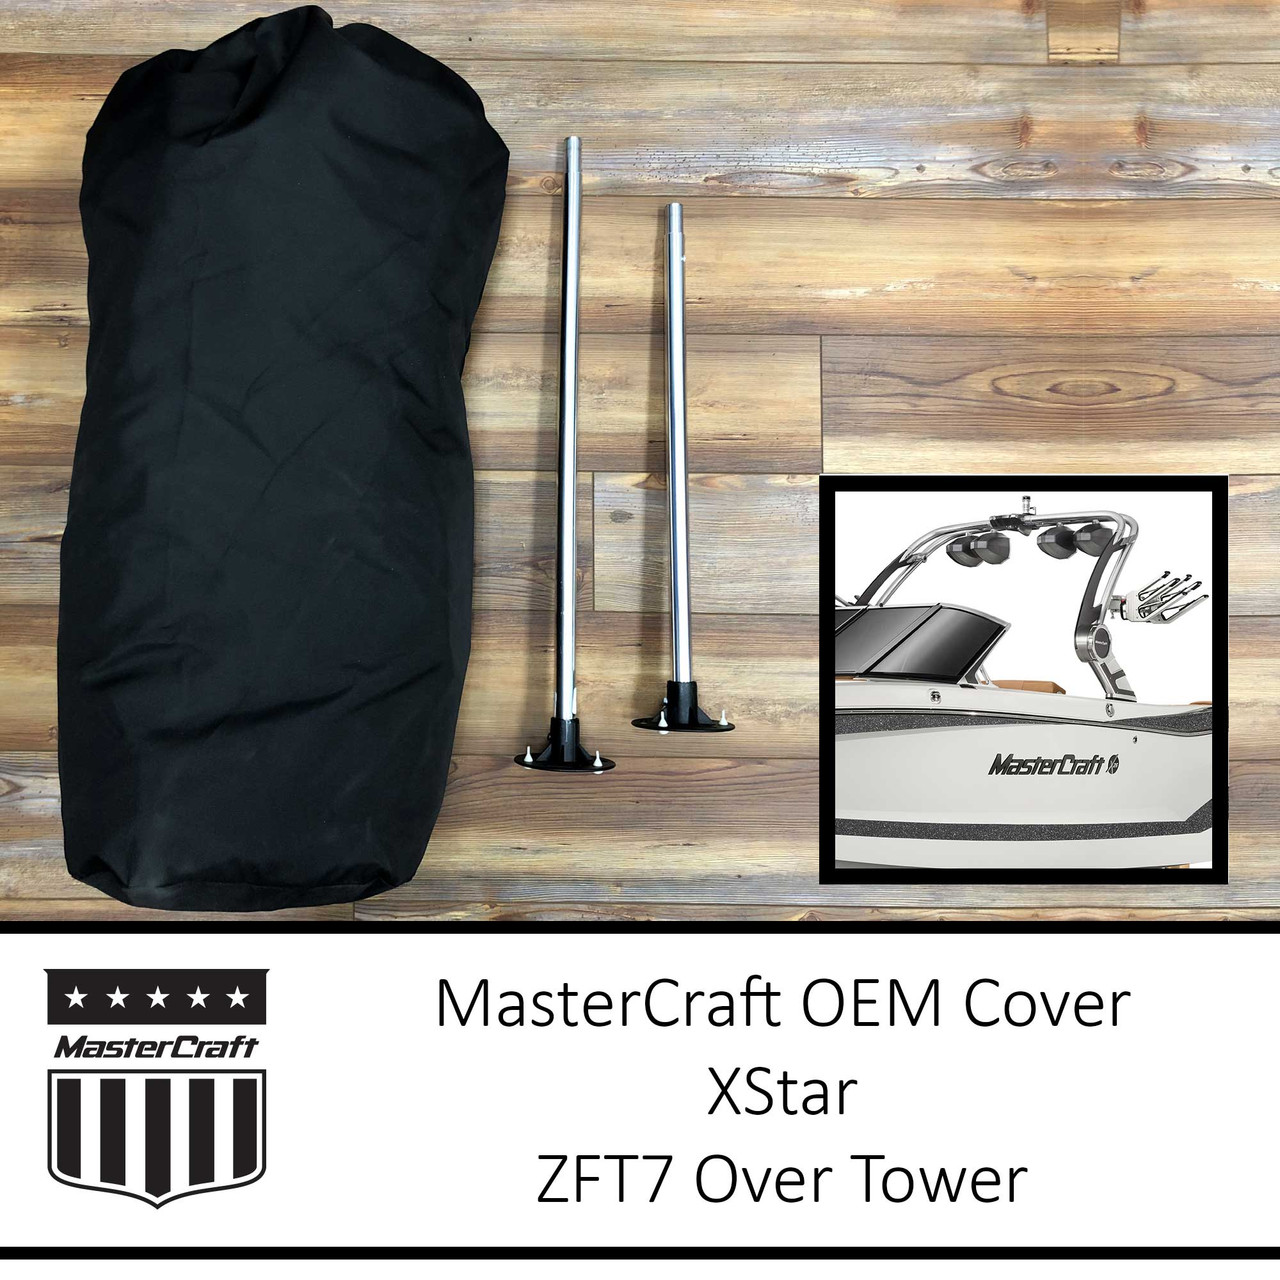 MasterCraft XStar Boat Cover | ZFT7 Tower | WaterSkis.com